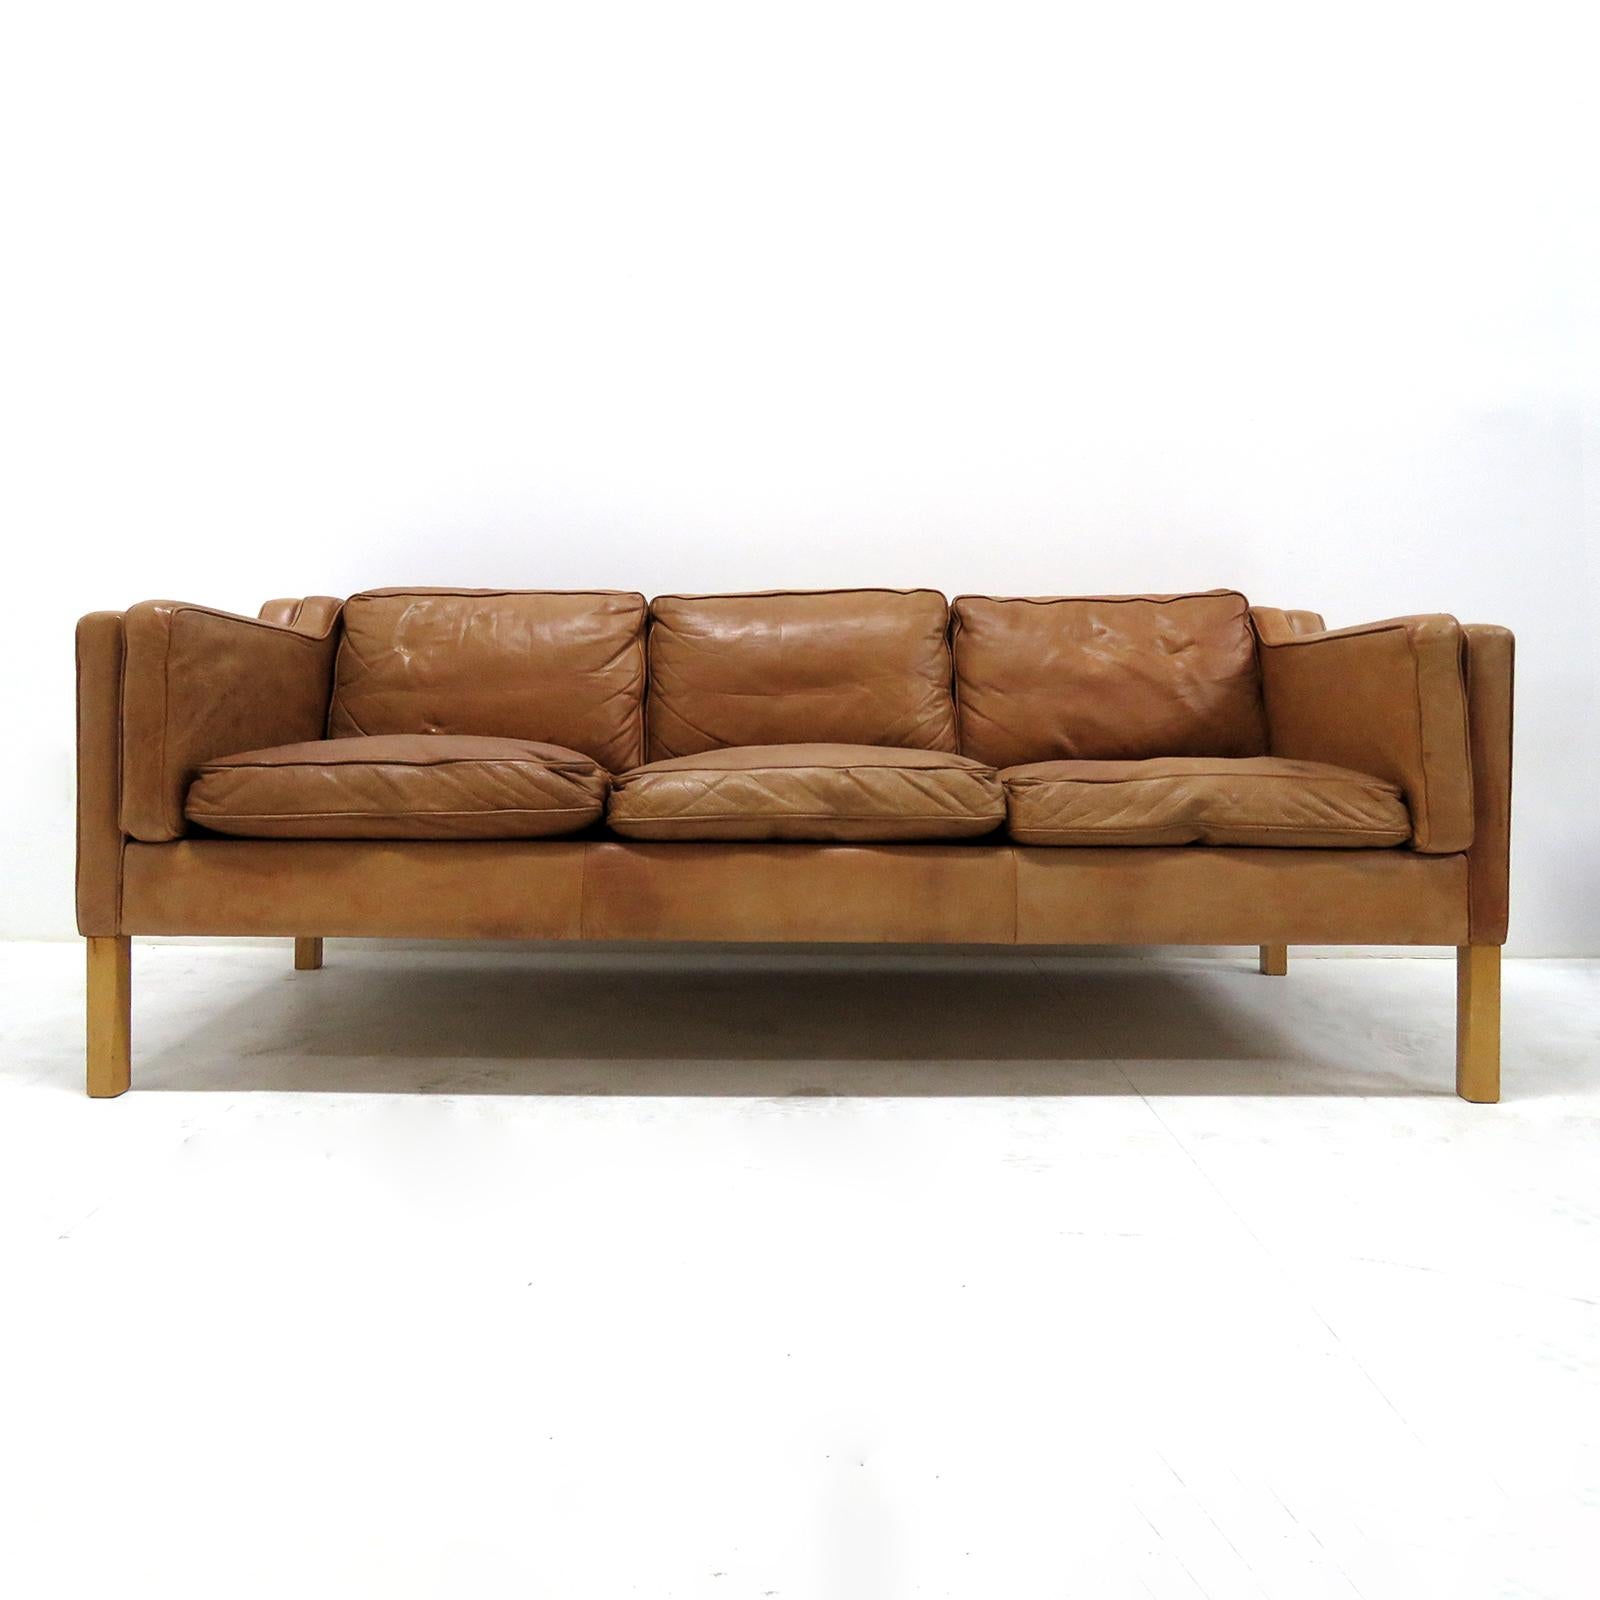 Wonderful 1960s, Danish 3-seat sofa in style of Borge Mogensen, in cognac colored leather on beech frame.